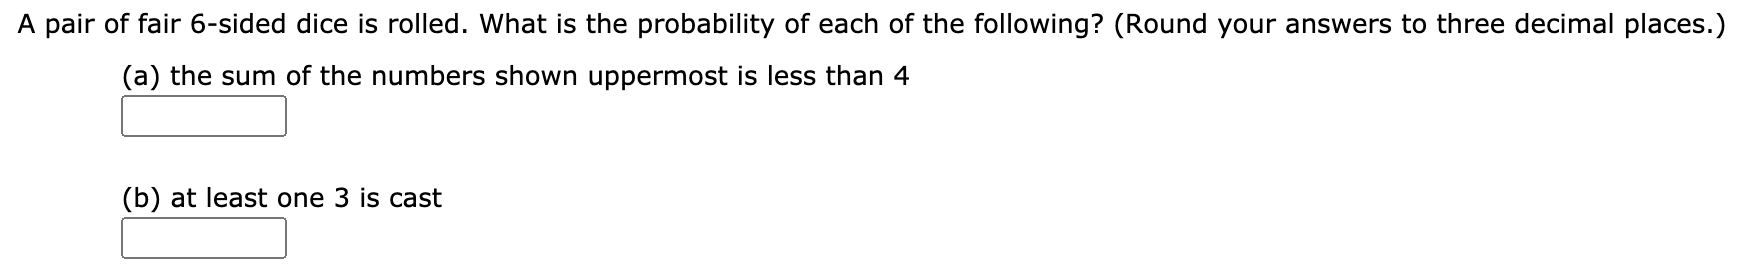 A pair of fair 6-sided dice is rolled. What is the probability of each of the following? (Round your answers to three decimal places.)
(a) the sum of the numbers shown uppermost is less than 4
(b) at least one 3 is cast
